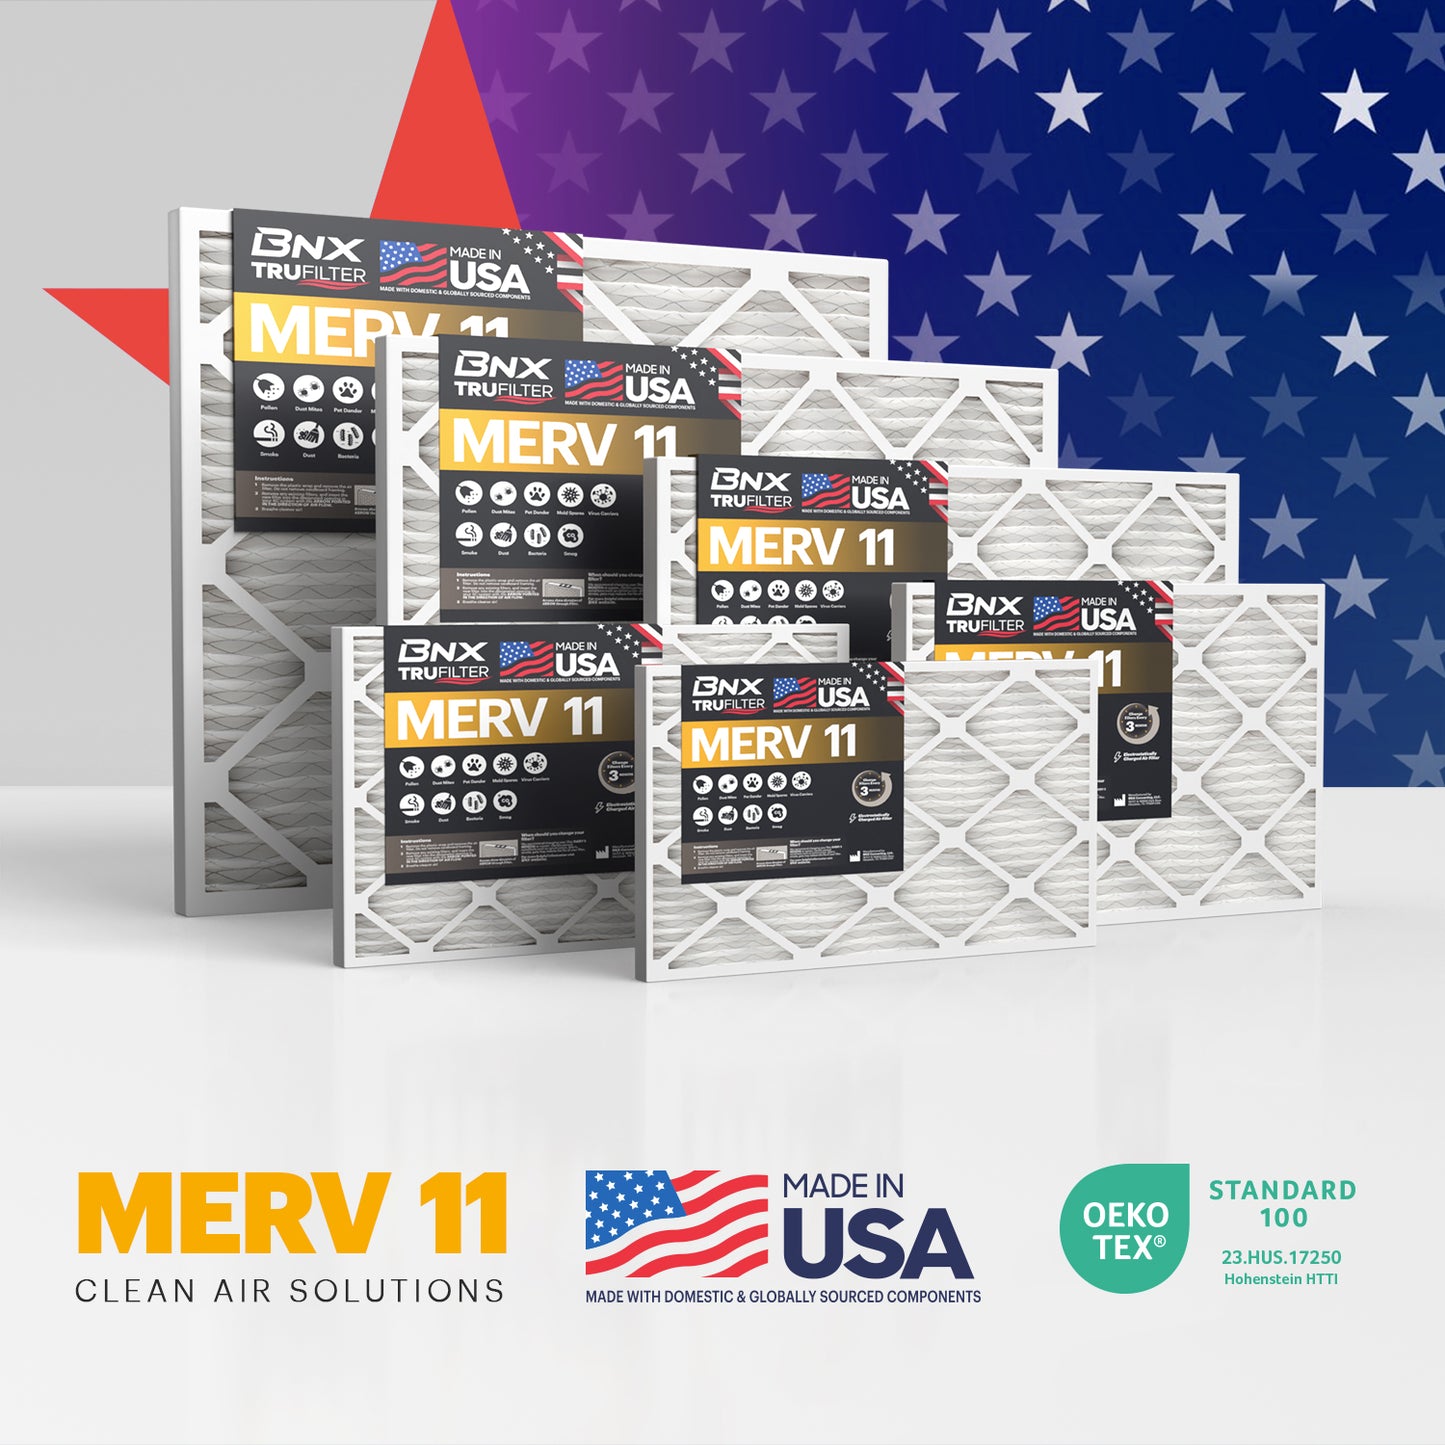 BNX TruFilter 20x20x4 MERV 11 Pleated Air Filter – Made in USA (2-Pack) (Slim Fit)